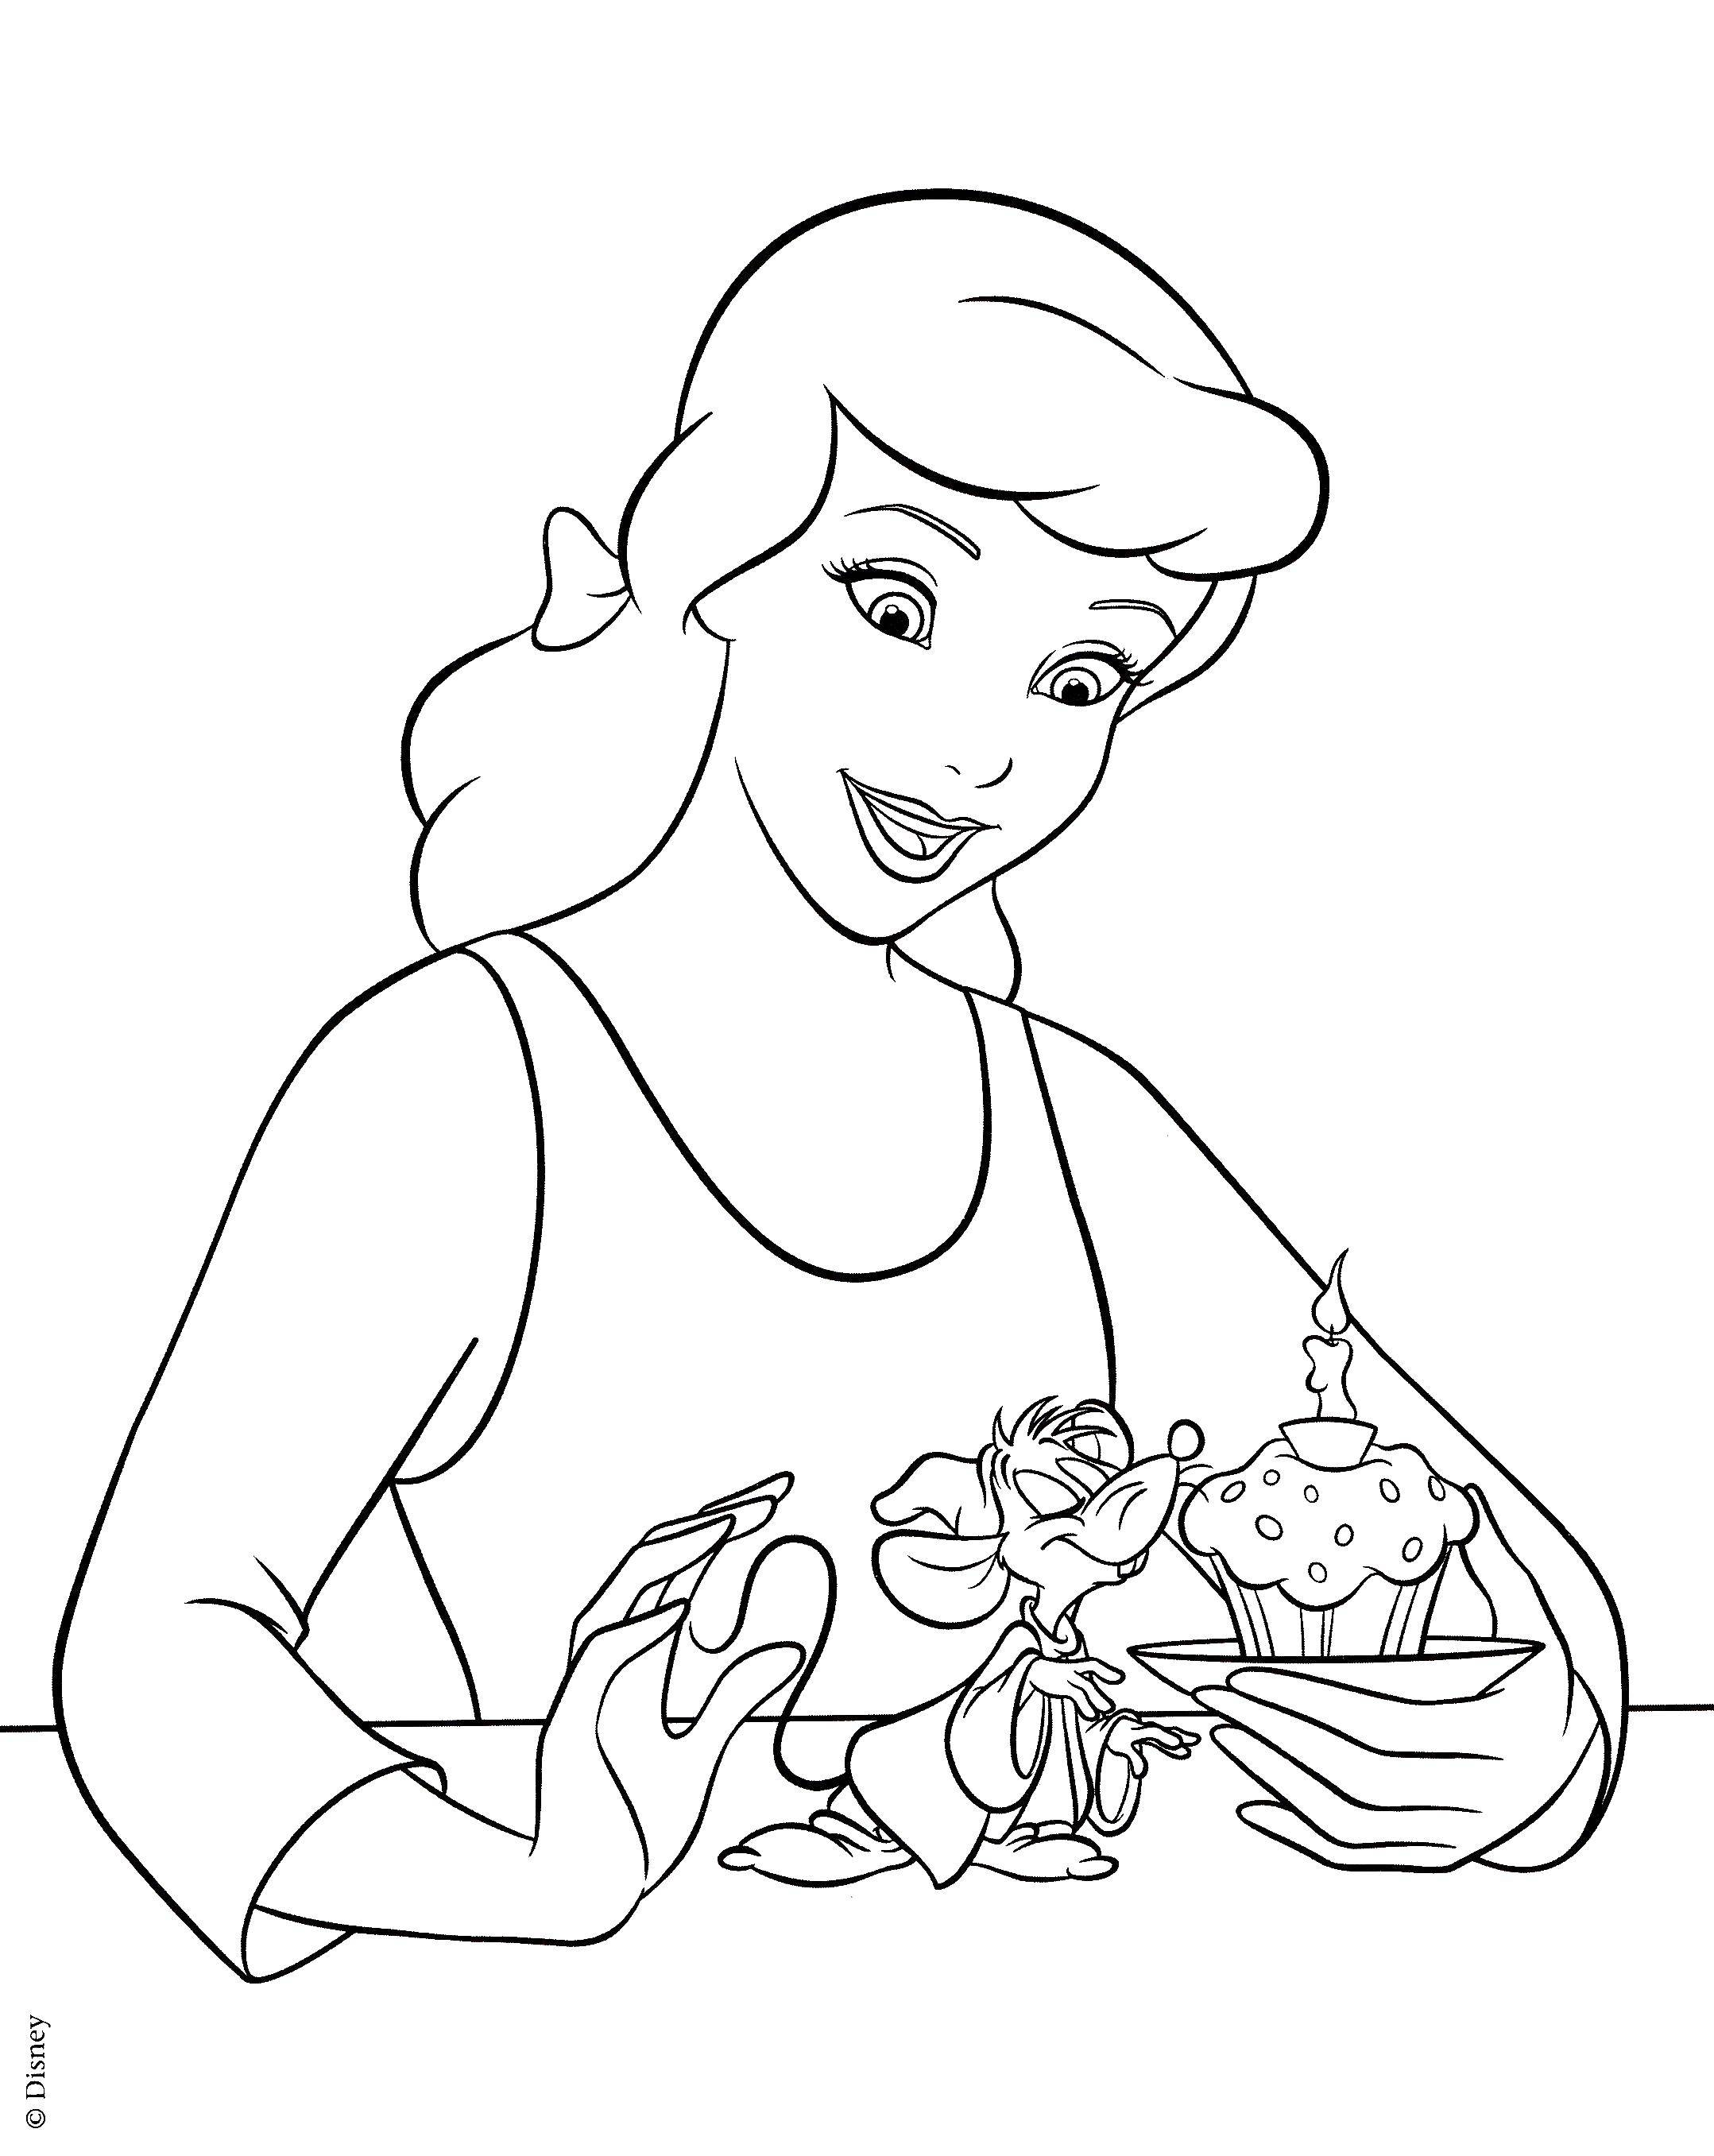 Coloring Cinderella with mouse. Category Princess. Tags:  Cinderella, Princess, mouse, Disney.